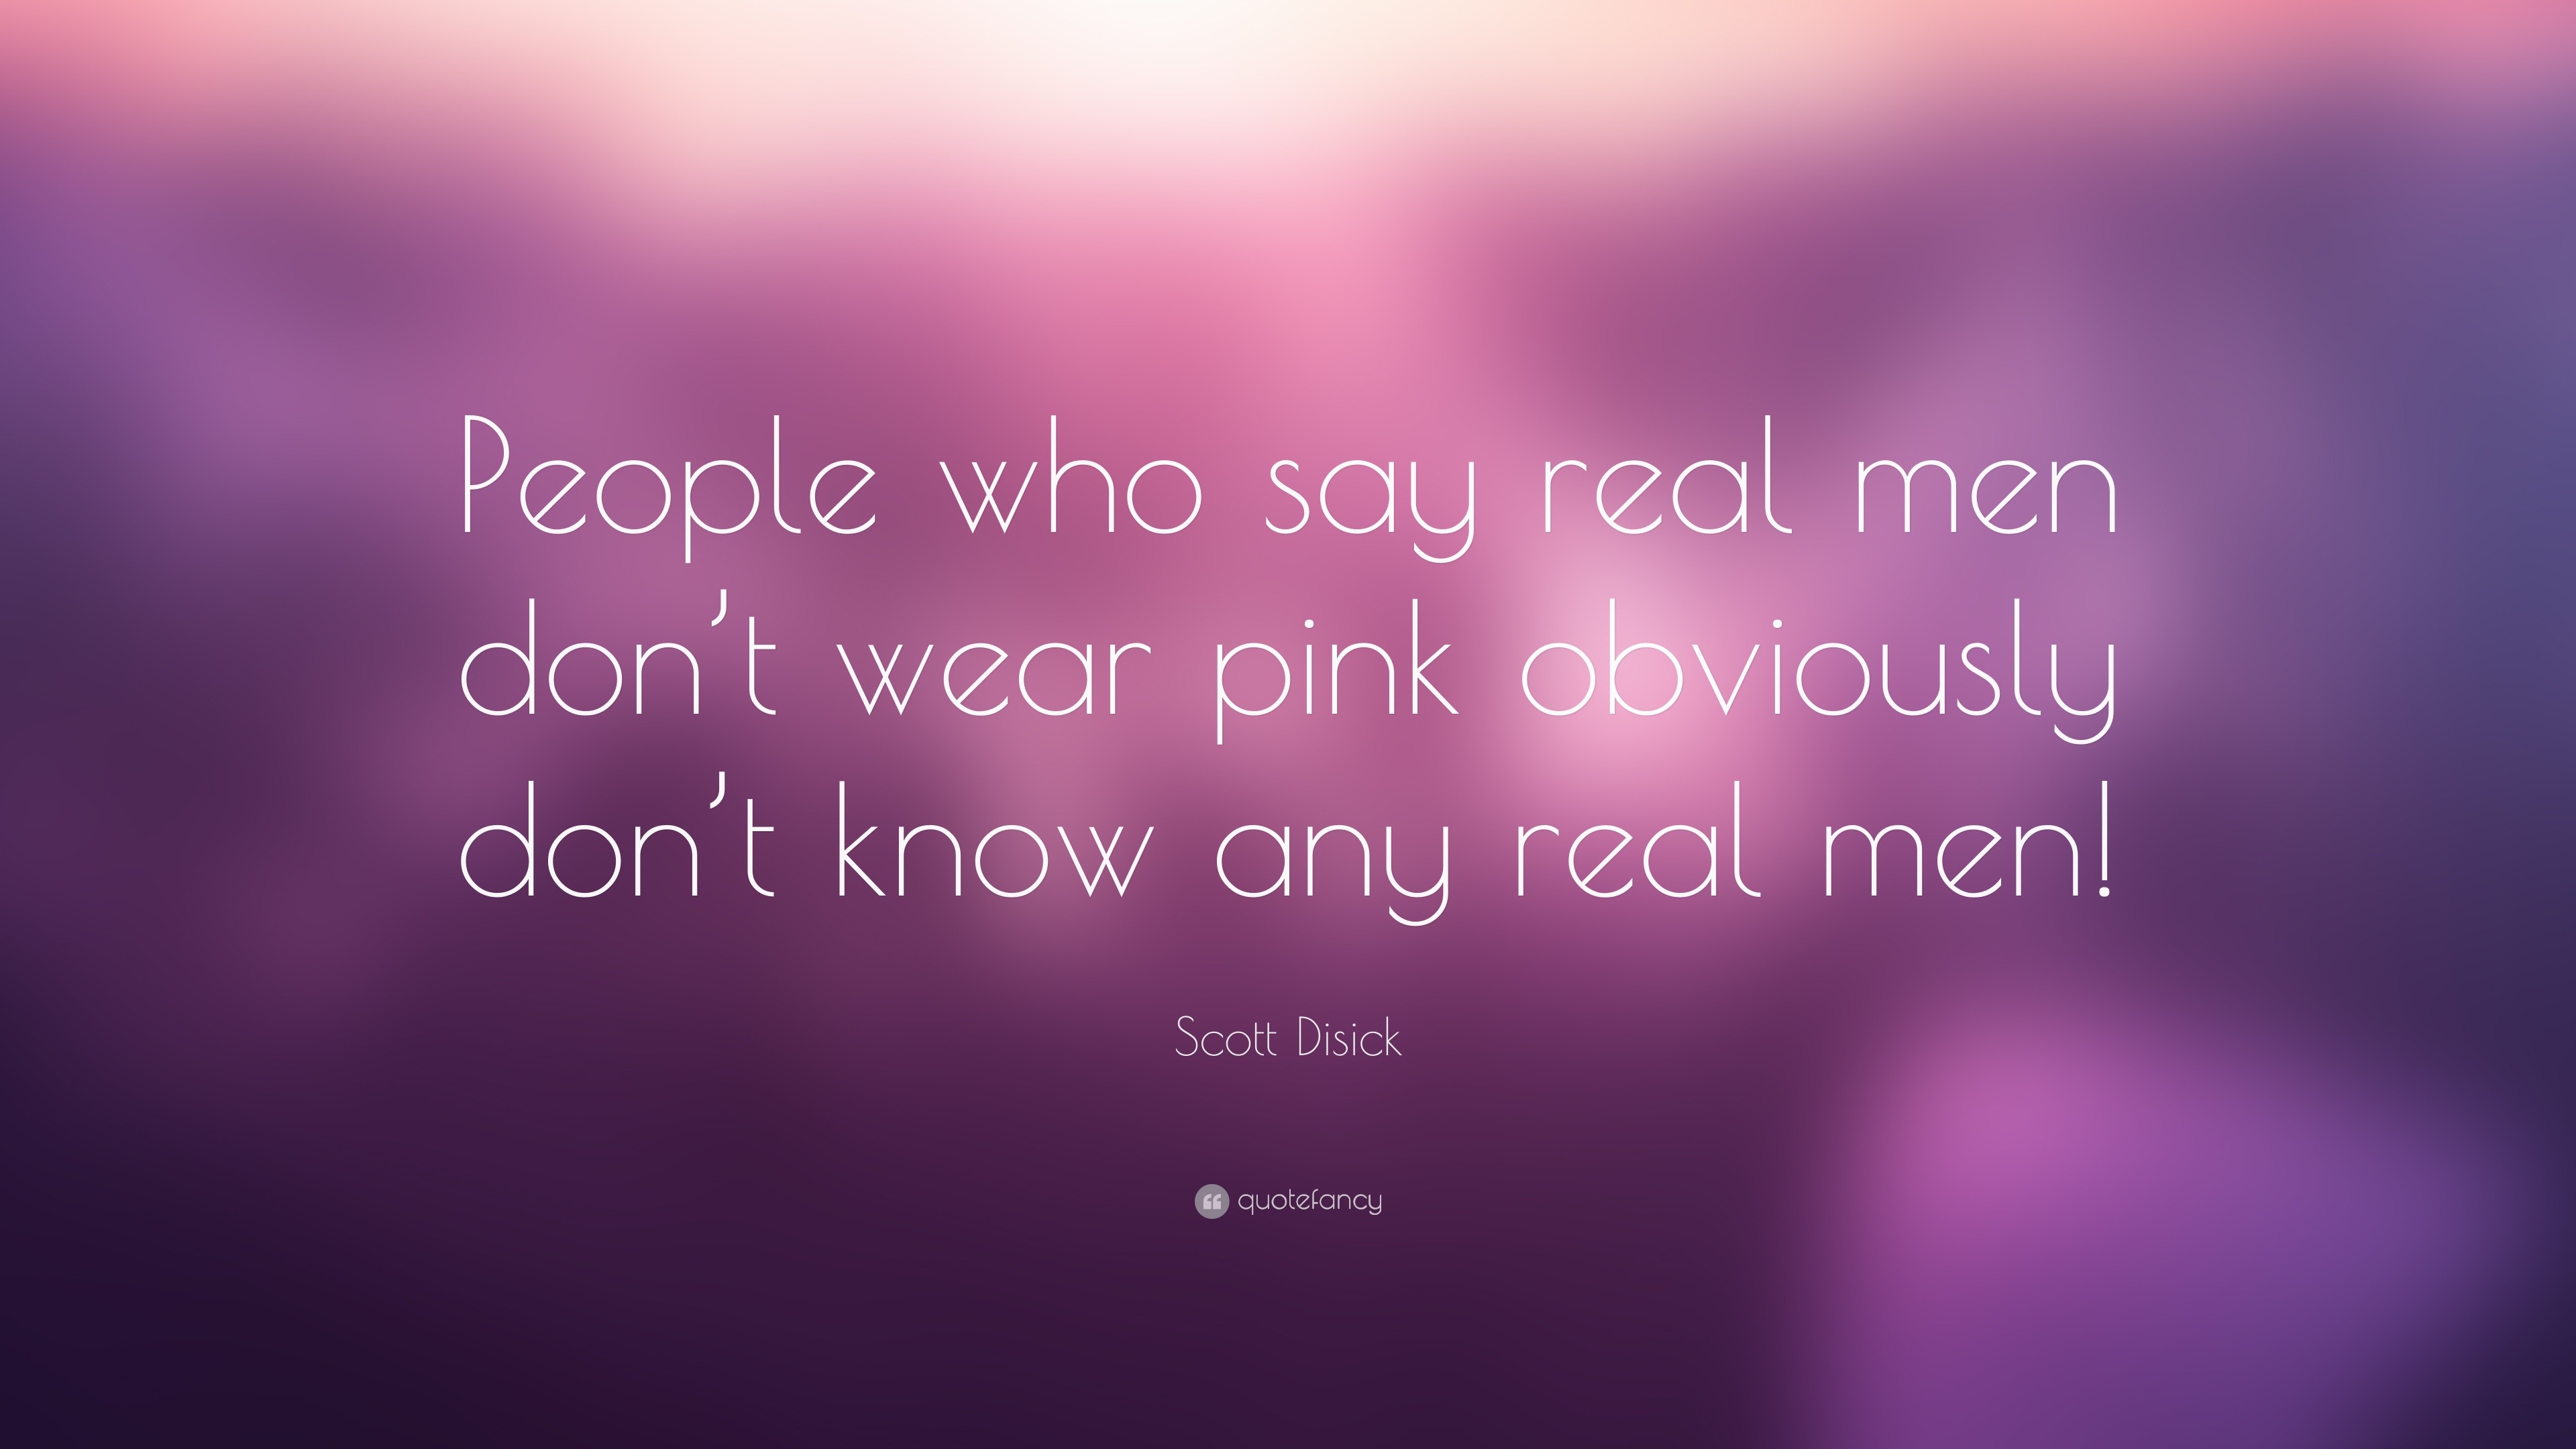 Scott Disick Quote “People who say real men don t wear pink obviously